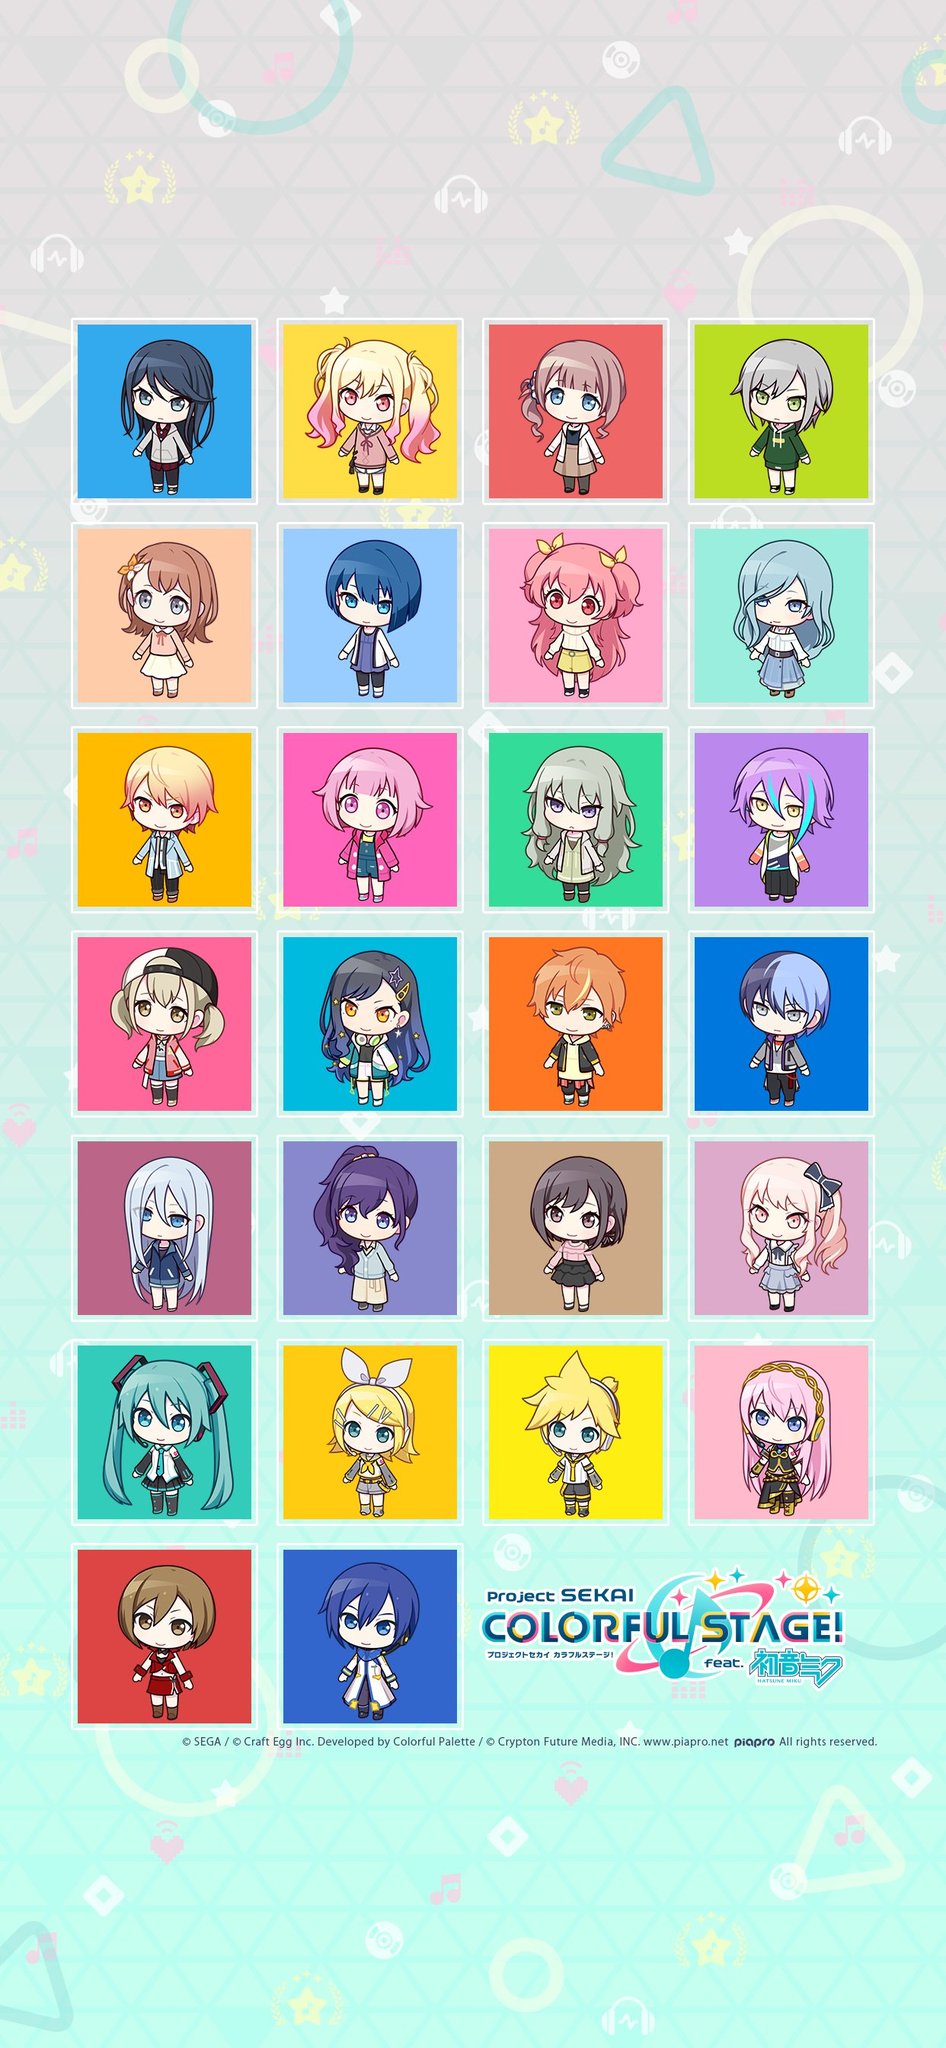 Project Sekai ENG (Unofficial) phone wallpaper of the ingame chibi characters has been released!